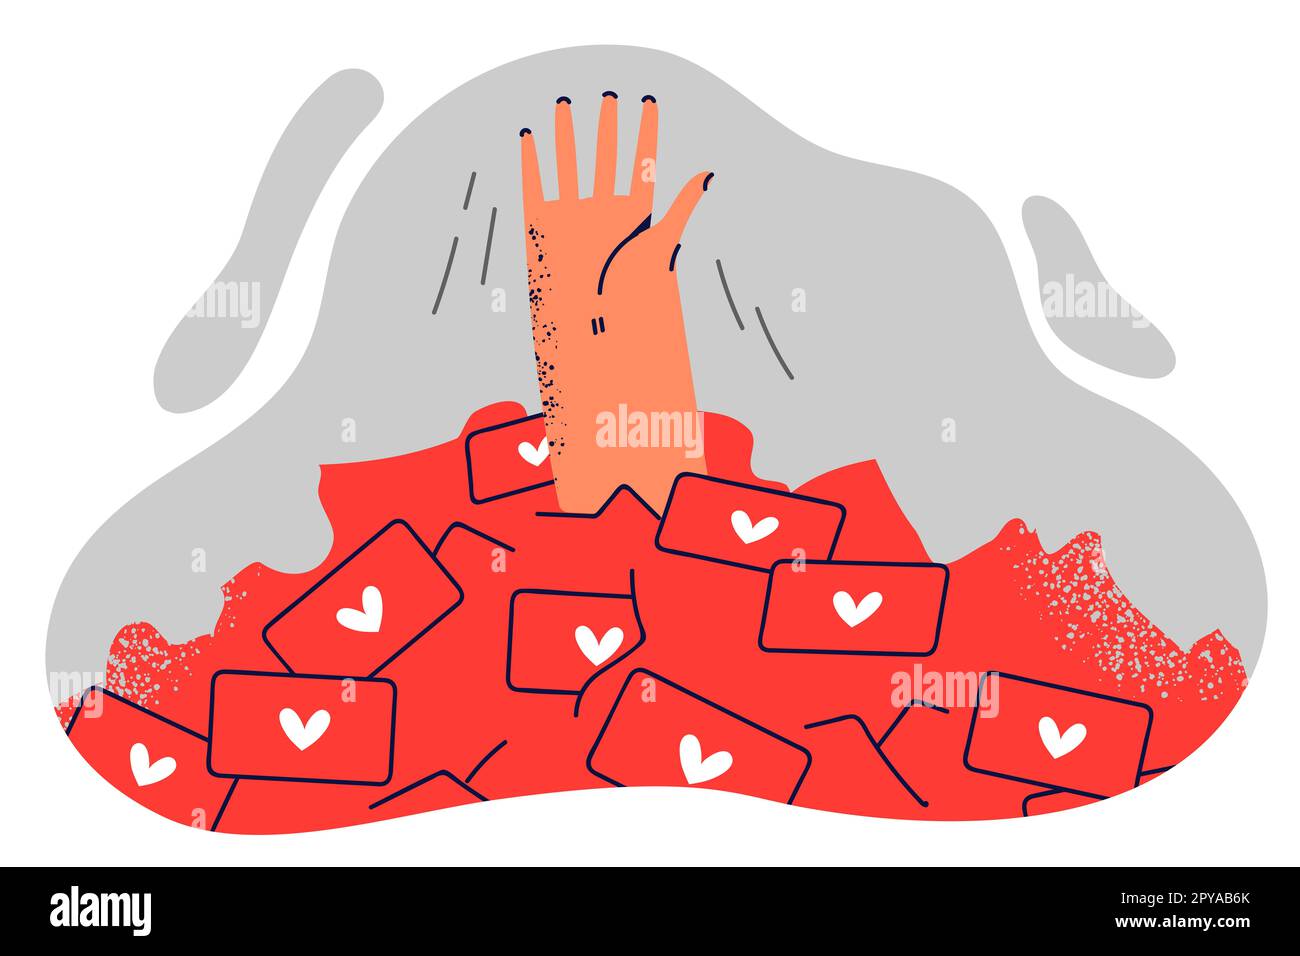 Hand of man drowning in likes symbolizing feedback in social networks for concept of addiction to Internet gadgets. Metaphor of cheating and black mar Stock Photo